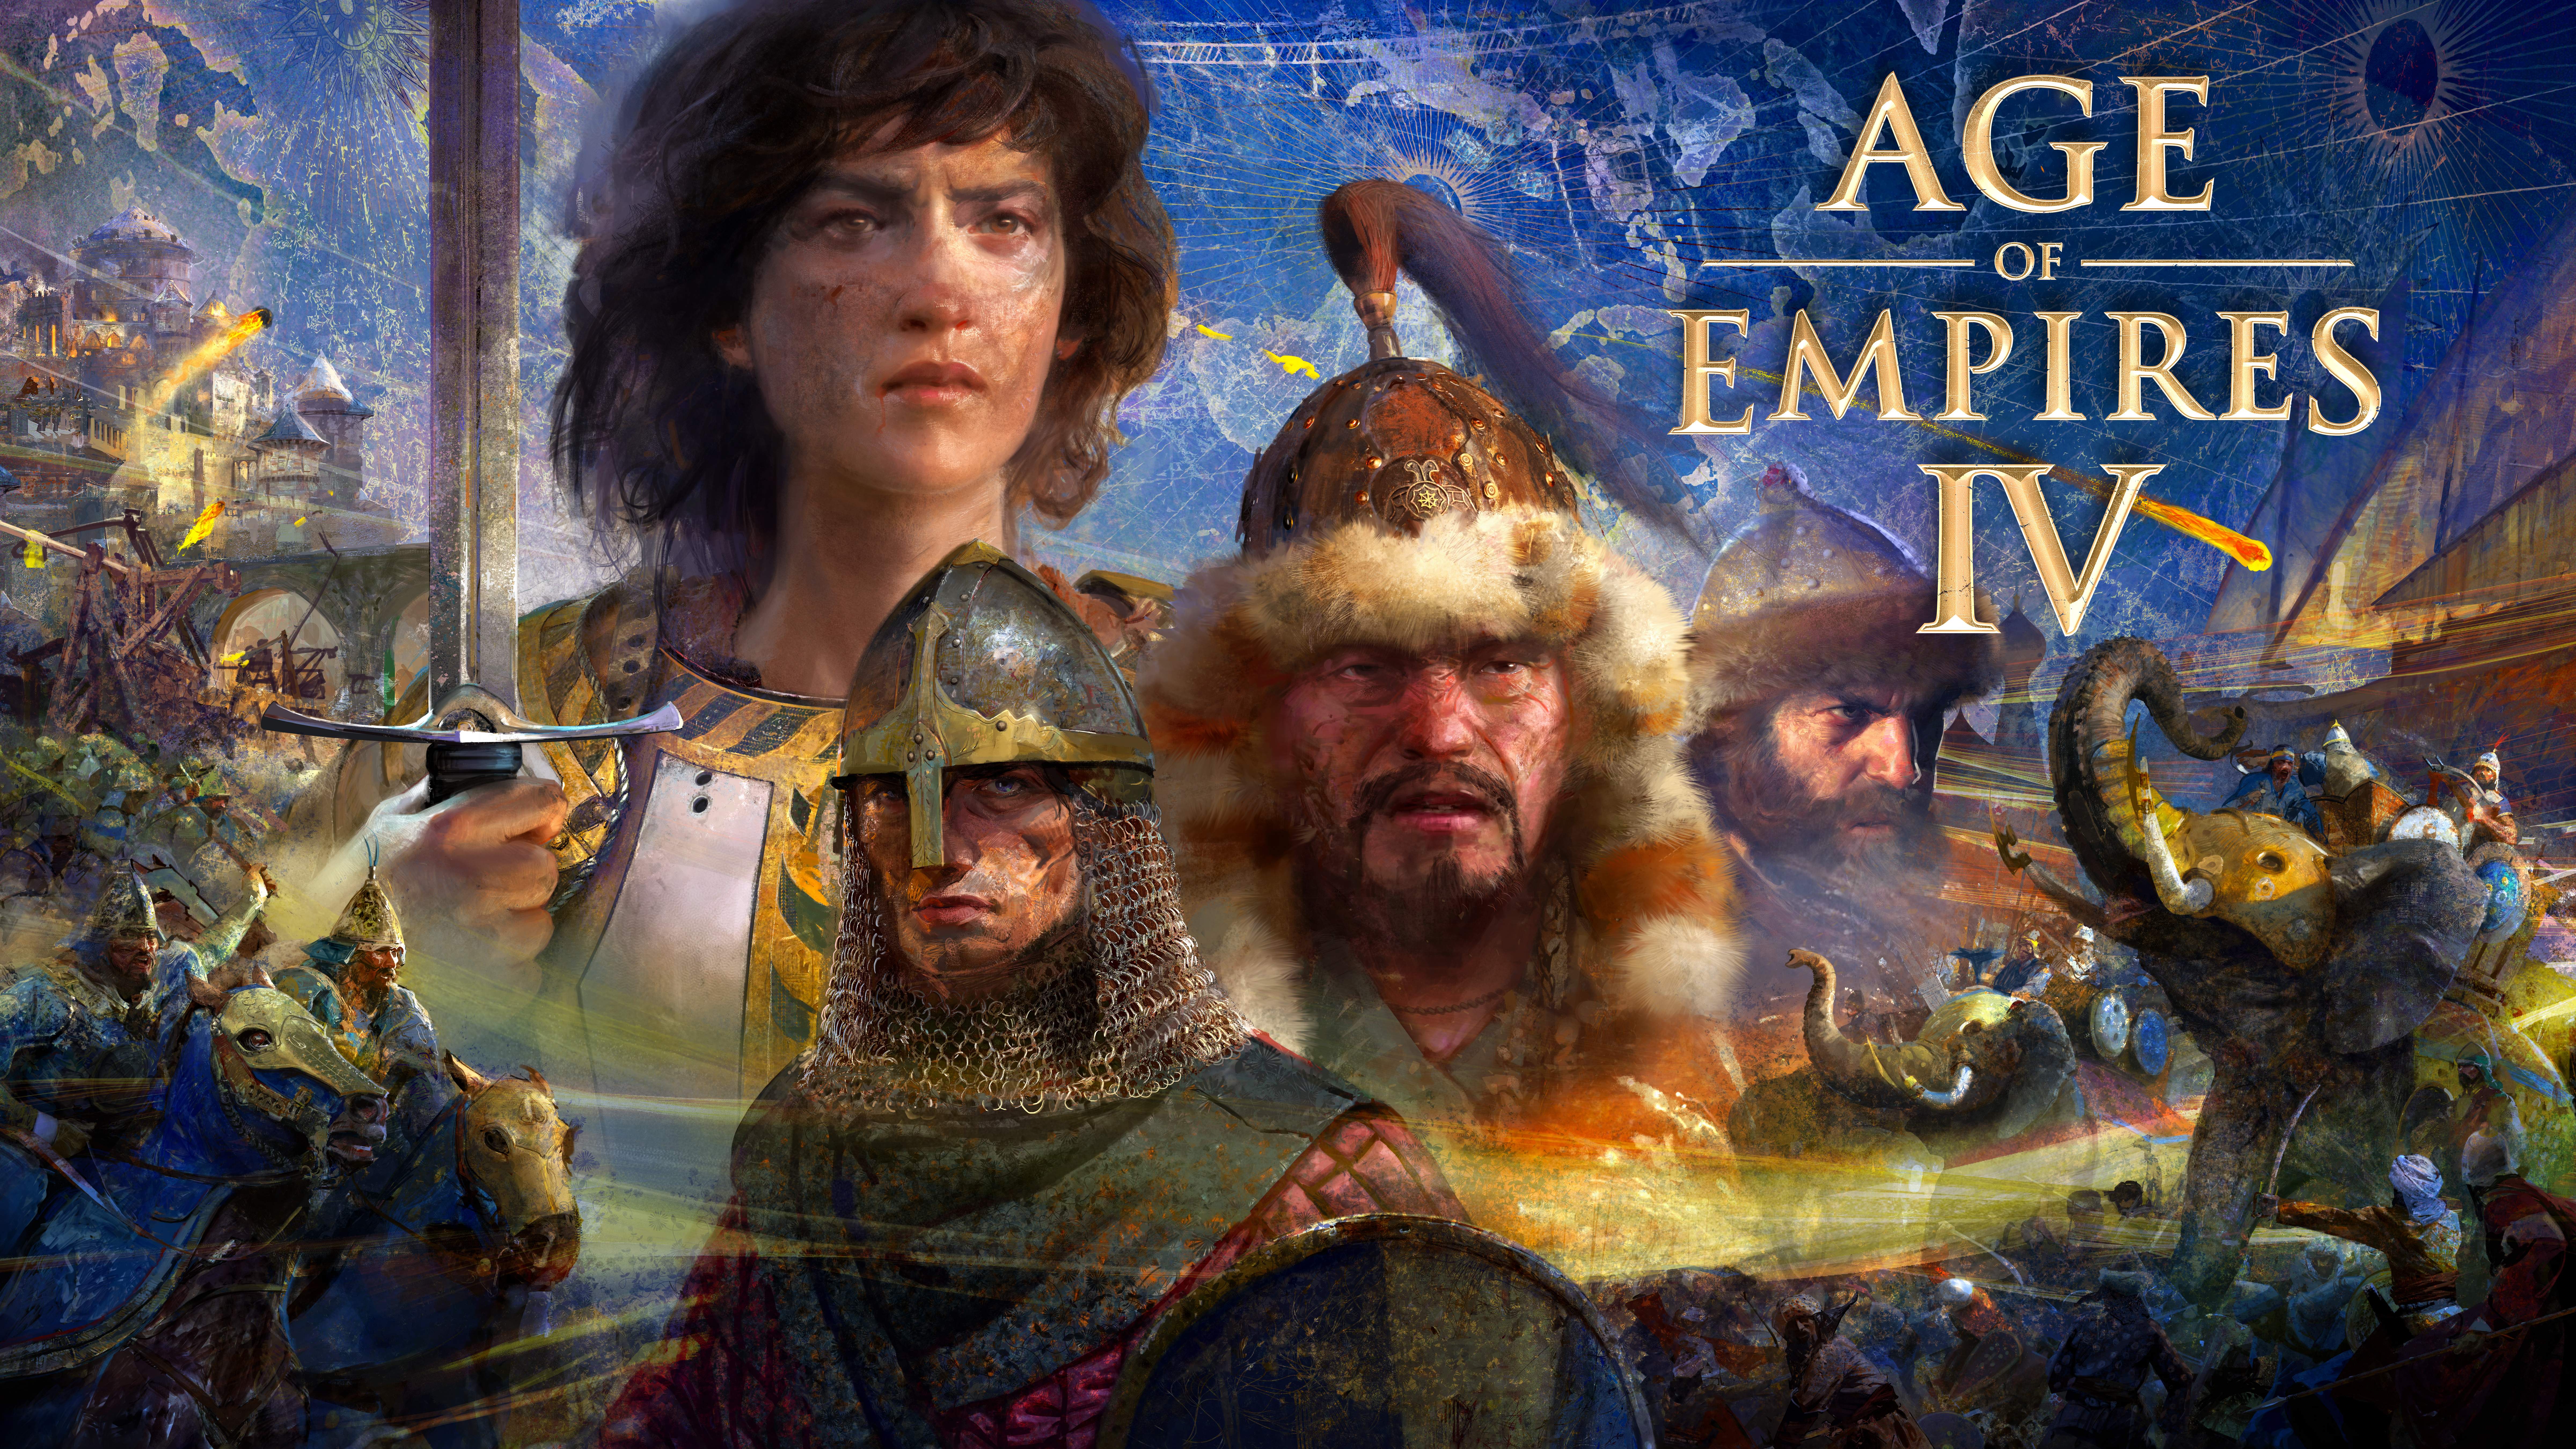 Card4game. Age of Empires 4 Постер. Age of Empires 4 (IV). Age of Empires IV обложка. Age of Empires 4 геймплей.